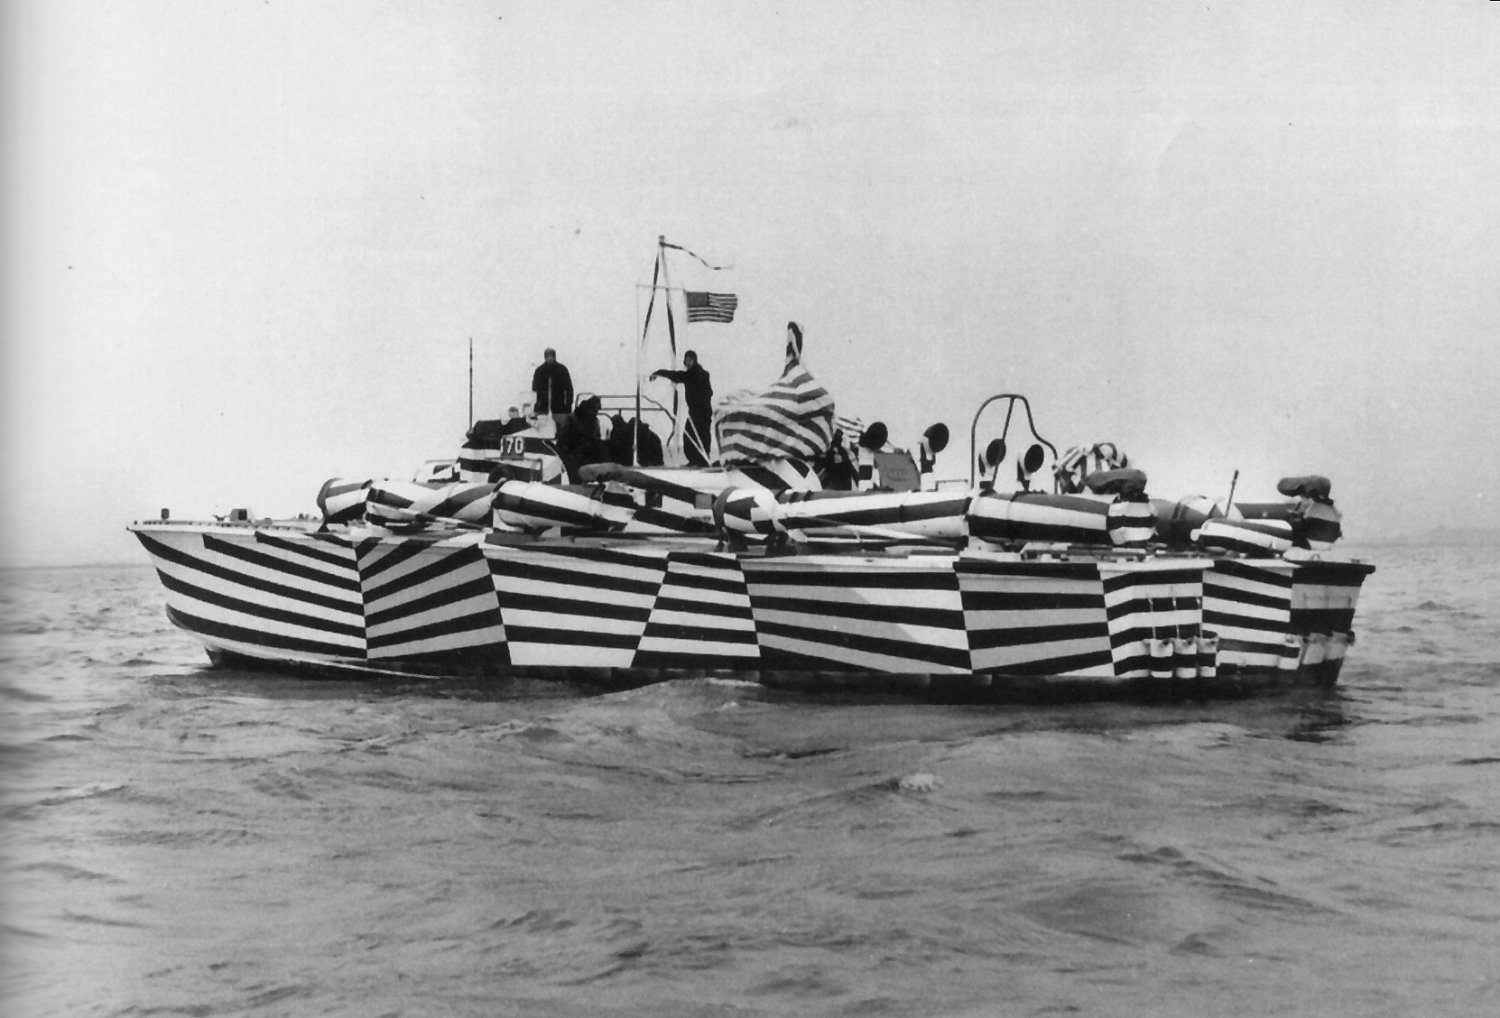 PT-170, an Elco 80-footer of Motor Torpedo Boat Squadron 10 (MTBRon 10), painted in “zebra” pattern designed to thwart enemy optical range finding, 1942. Photo 1 of 2